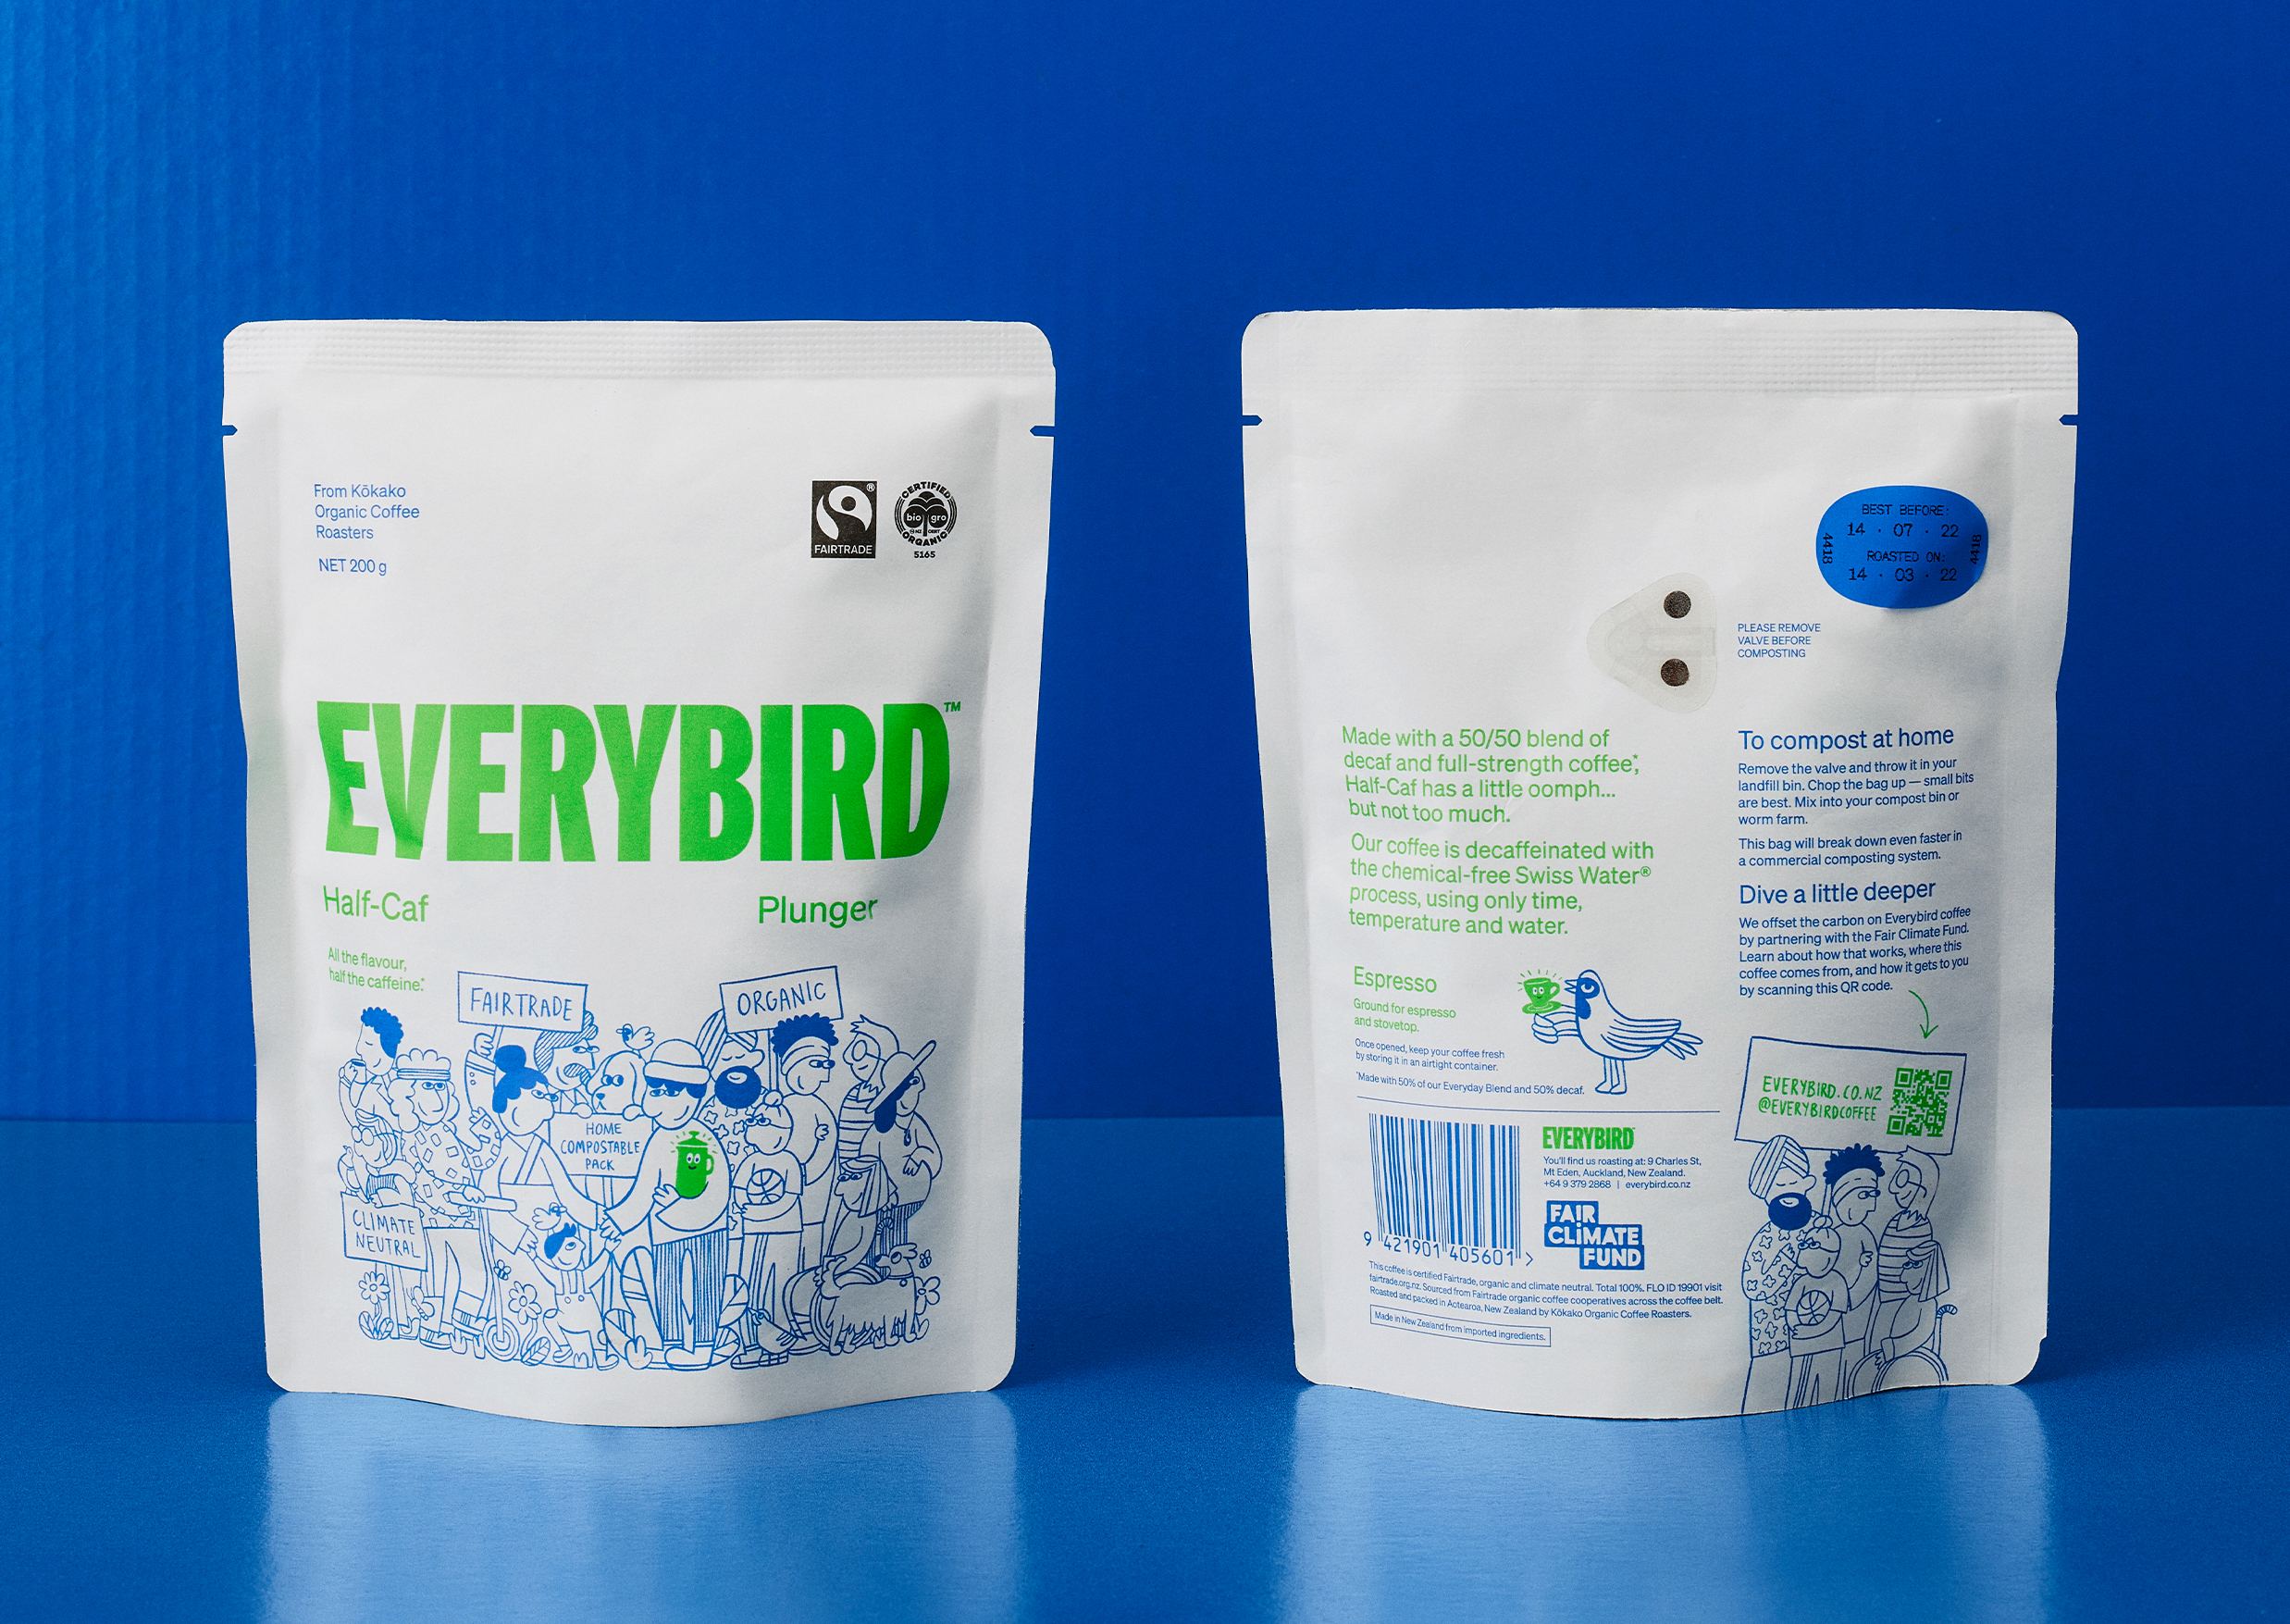 Logo, illustration and packaging by Marx Design for ethical New Zealand coffee brand Everybird